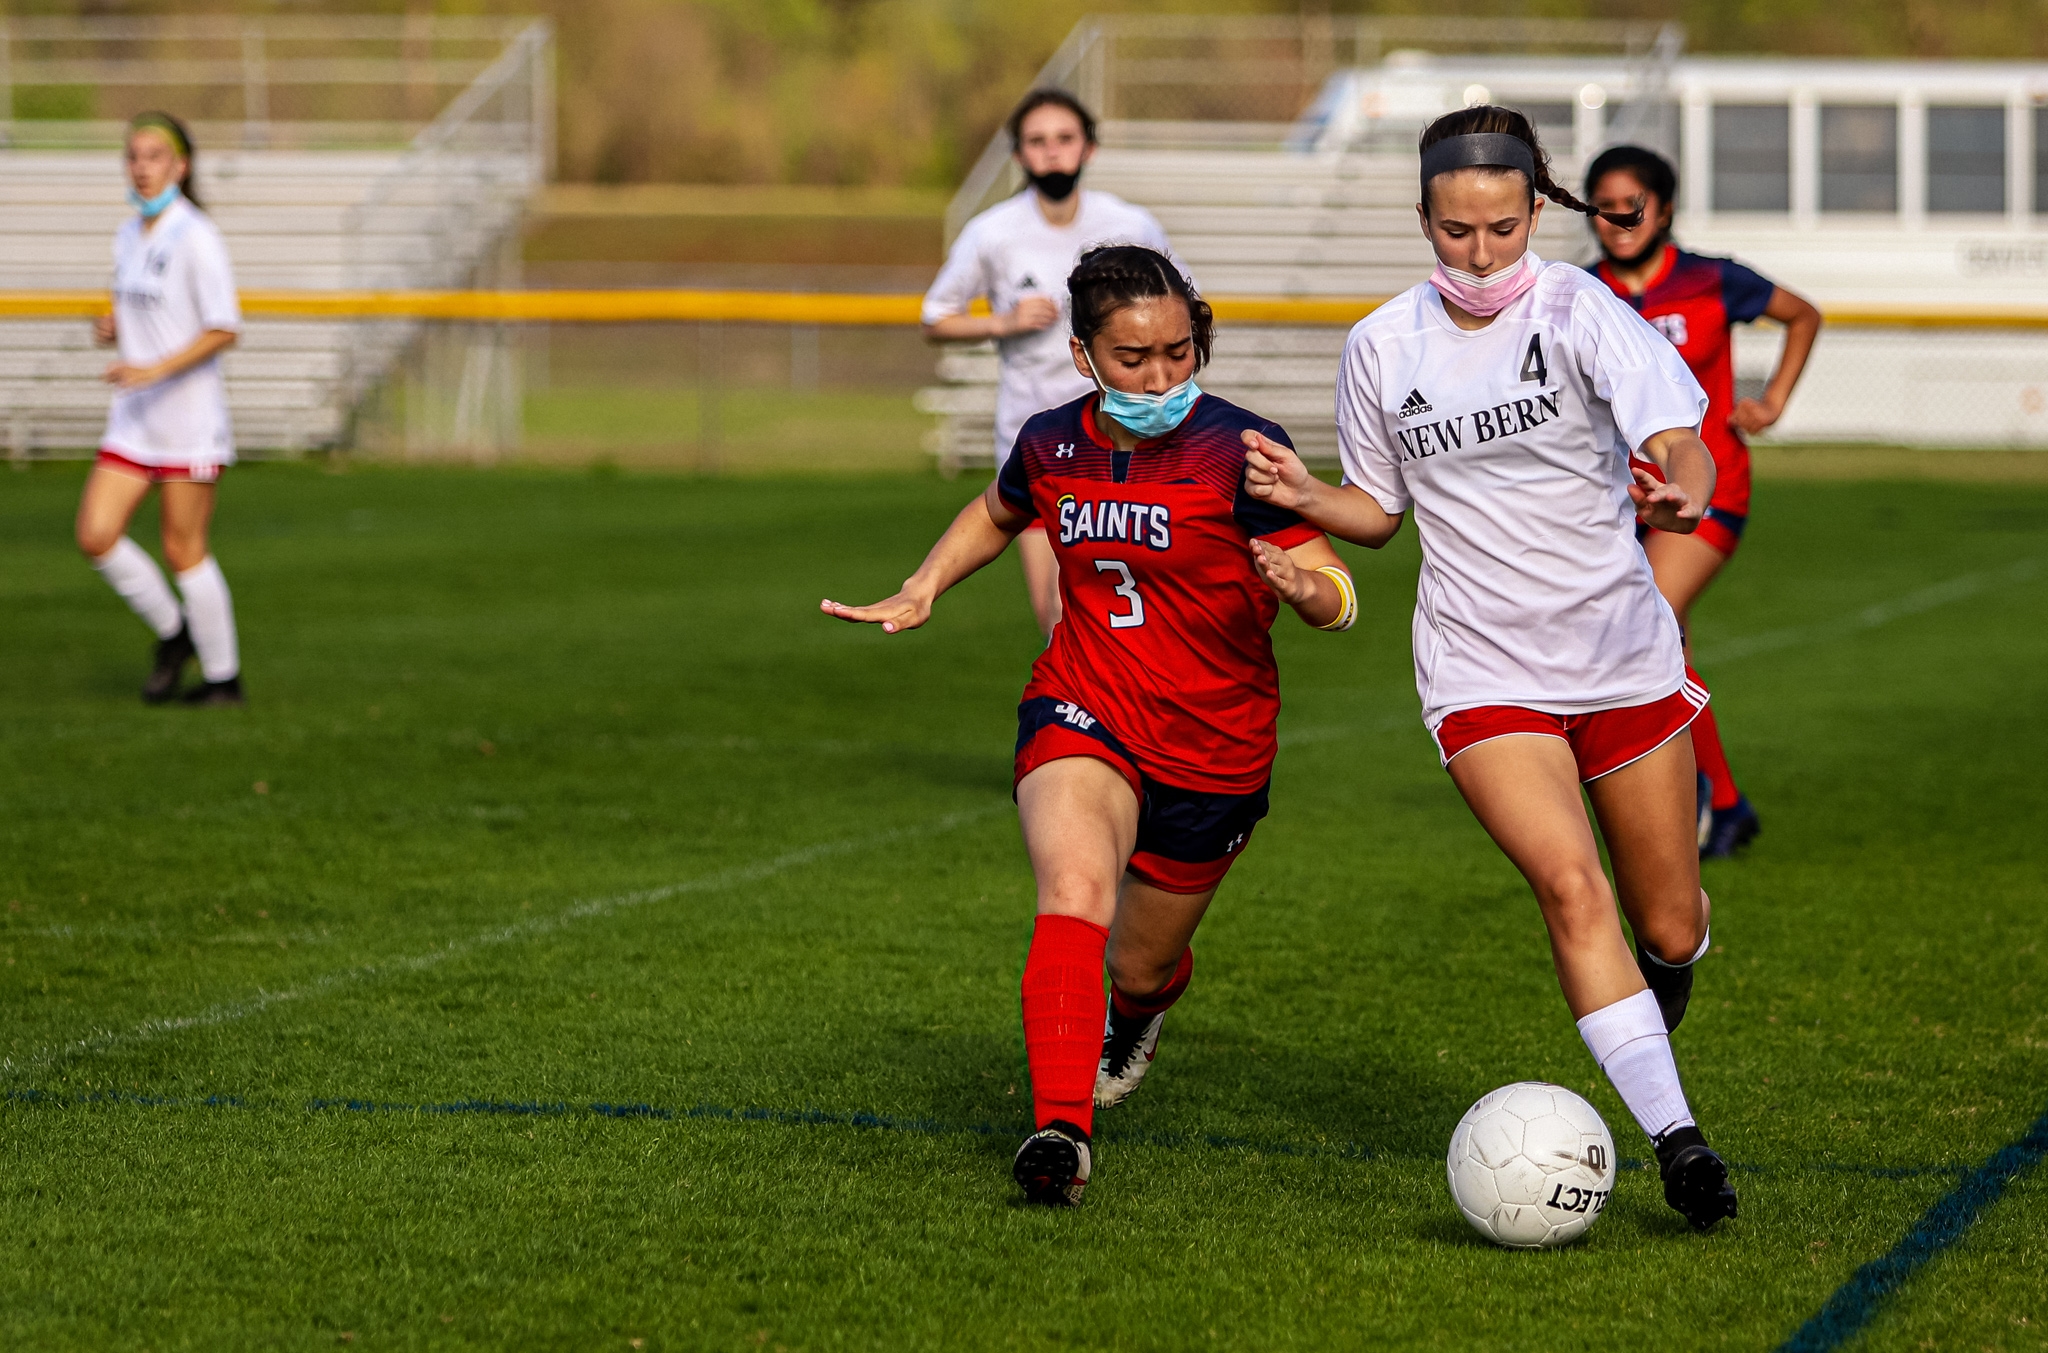 Girls Soccer: Southern Wayne Unable To Hold Off New Bern (PHOTO GALLERY)